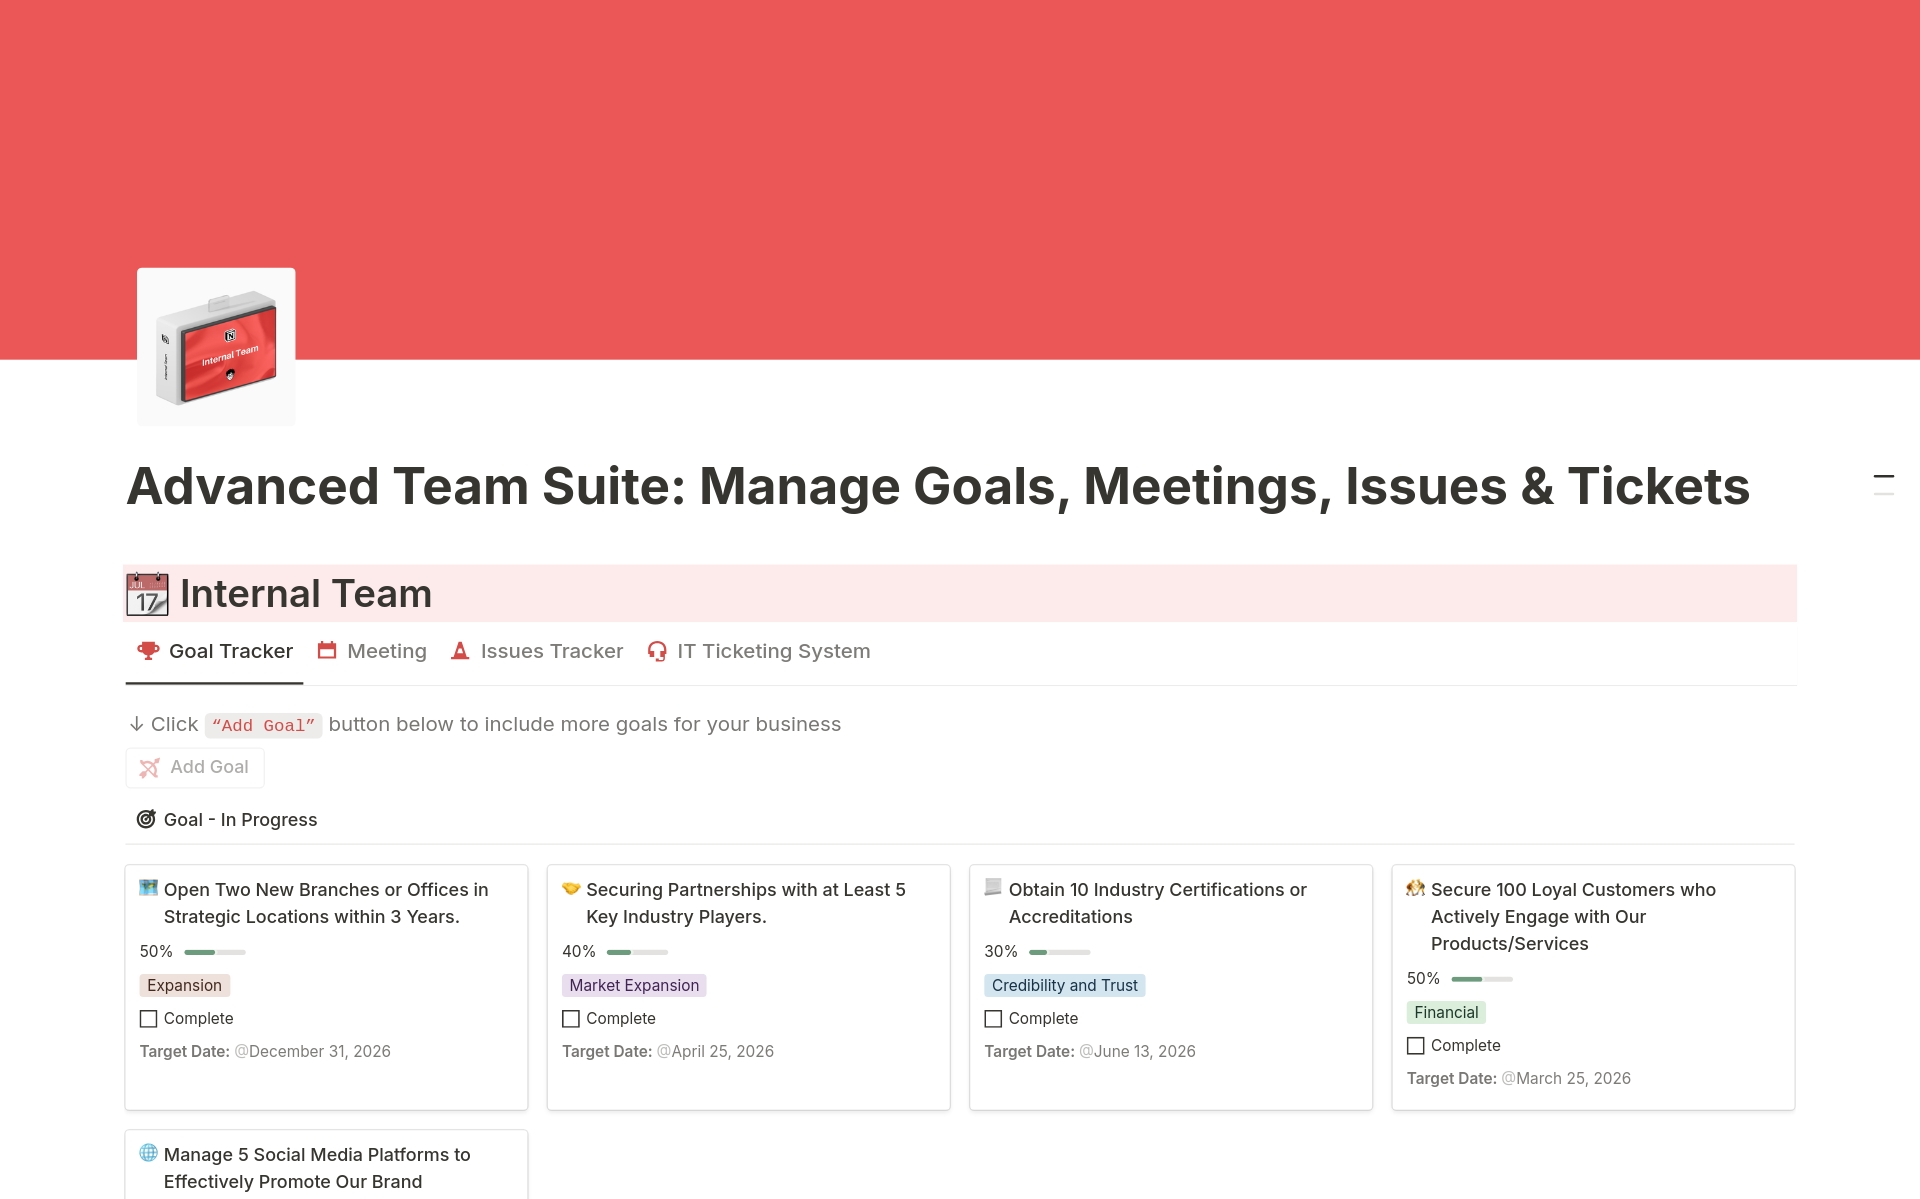 Supercharge your team's productivity and collaboration:
✓ Goal Tracker: Track team objectives visually
✓ Meeting Management: Focus meetings with linked tasks
✓ Issue Tracker: Prioritize and visualize issues
✓ IT Ticketing System: Manage IT requests efficiently